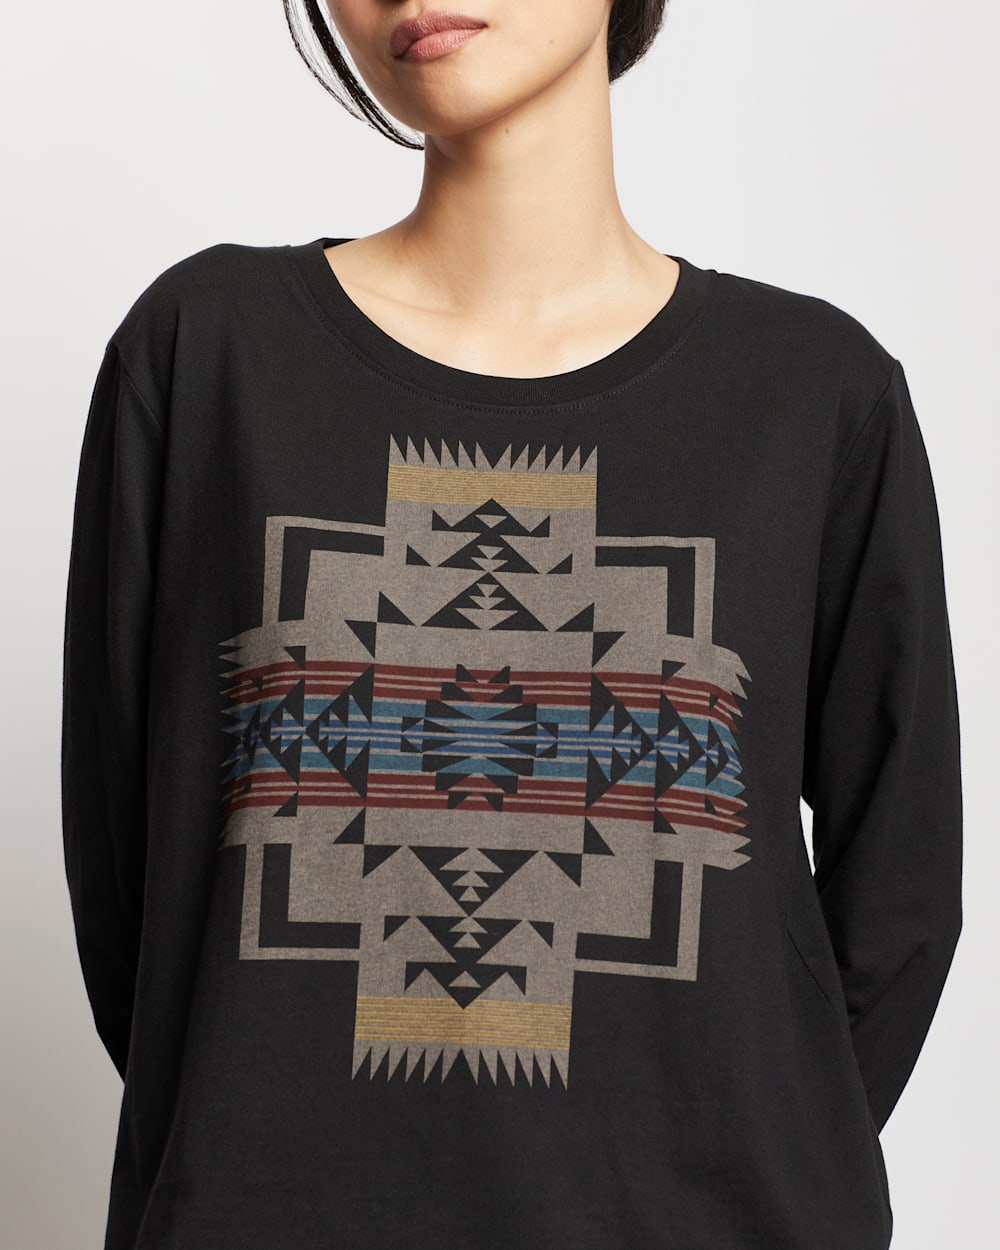 ALTERNATE VIEW OF WOMEN'S LONG-SLEEVE GRAPHIC TEE IN BLACK CHIEF JOSEPH image number 2